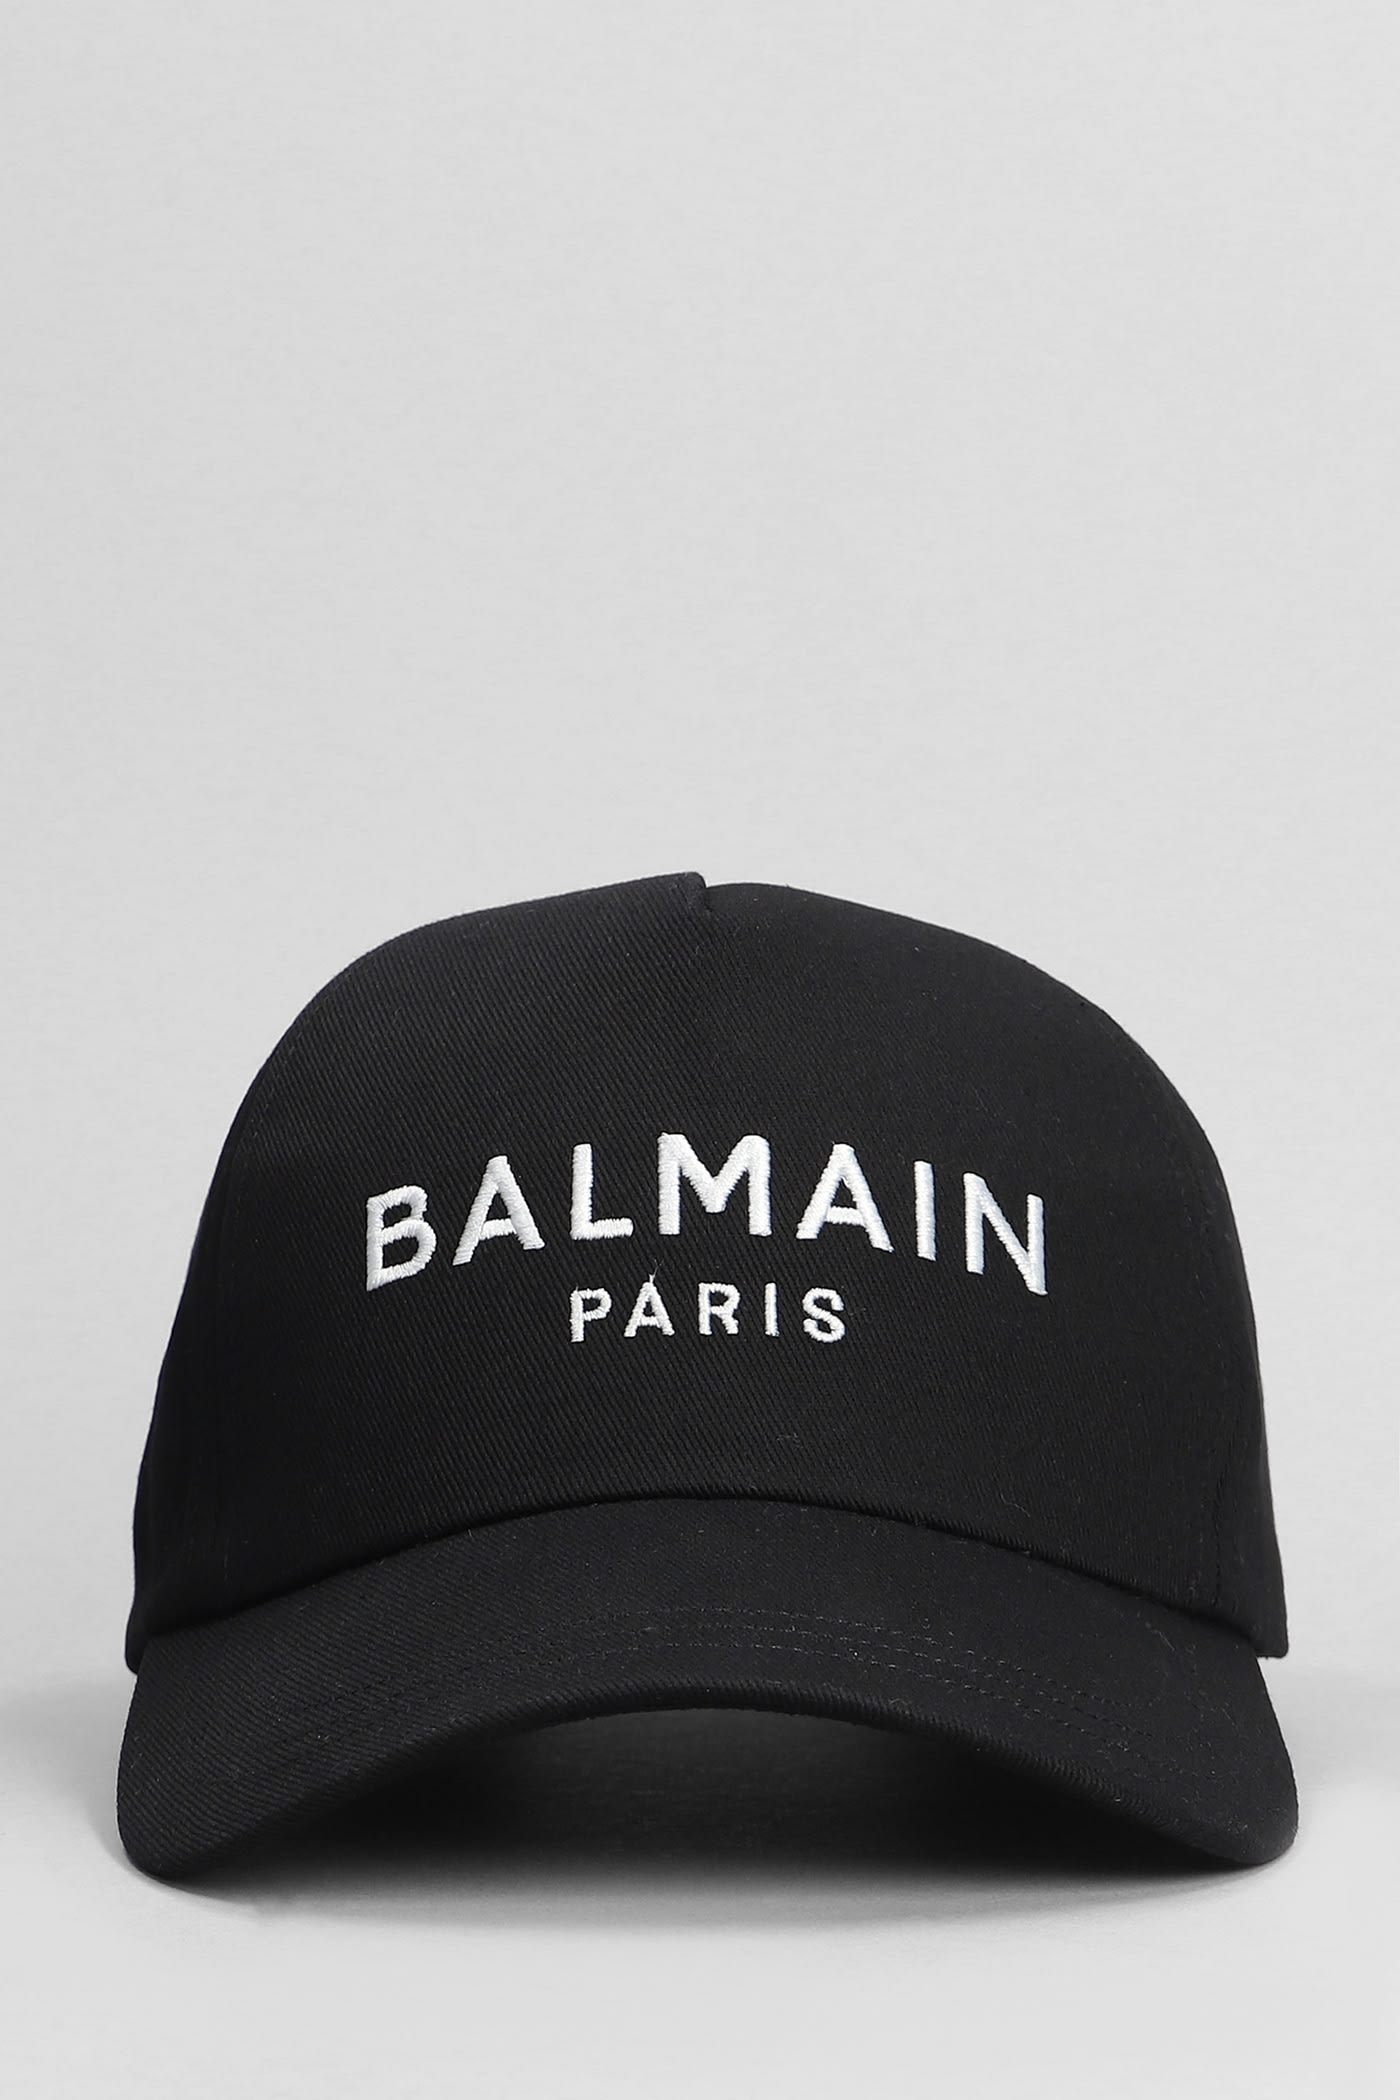 Hats In Black Cotton